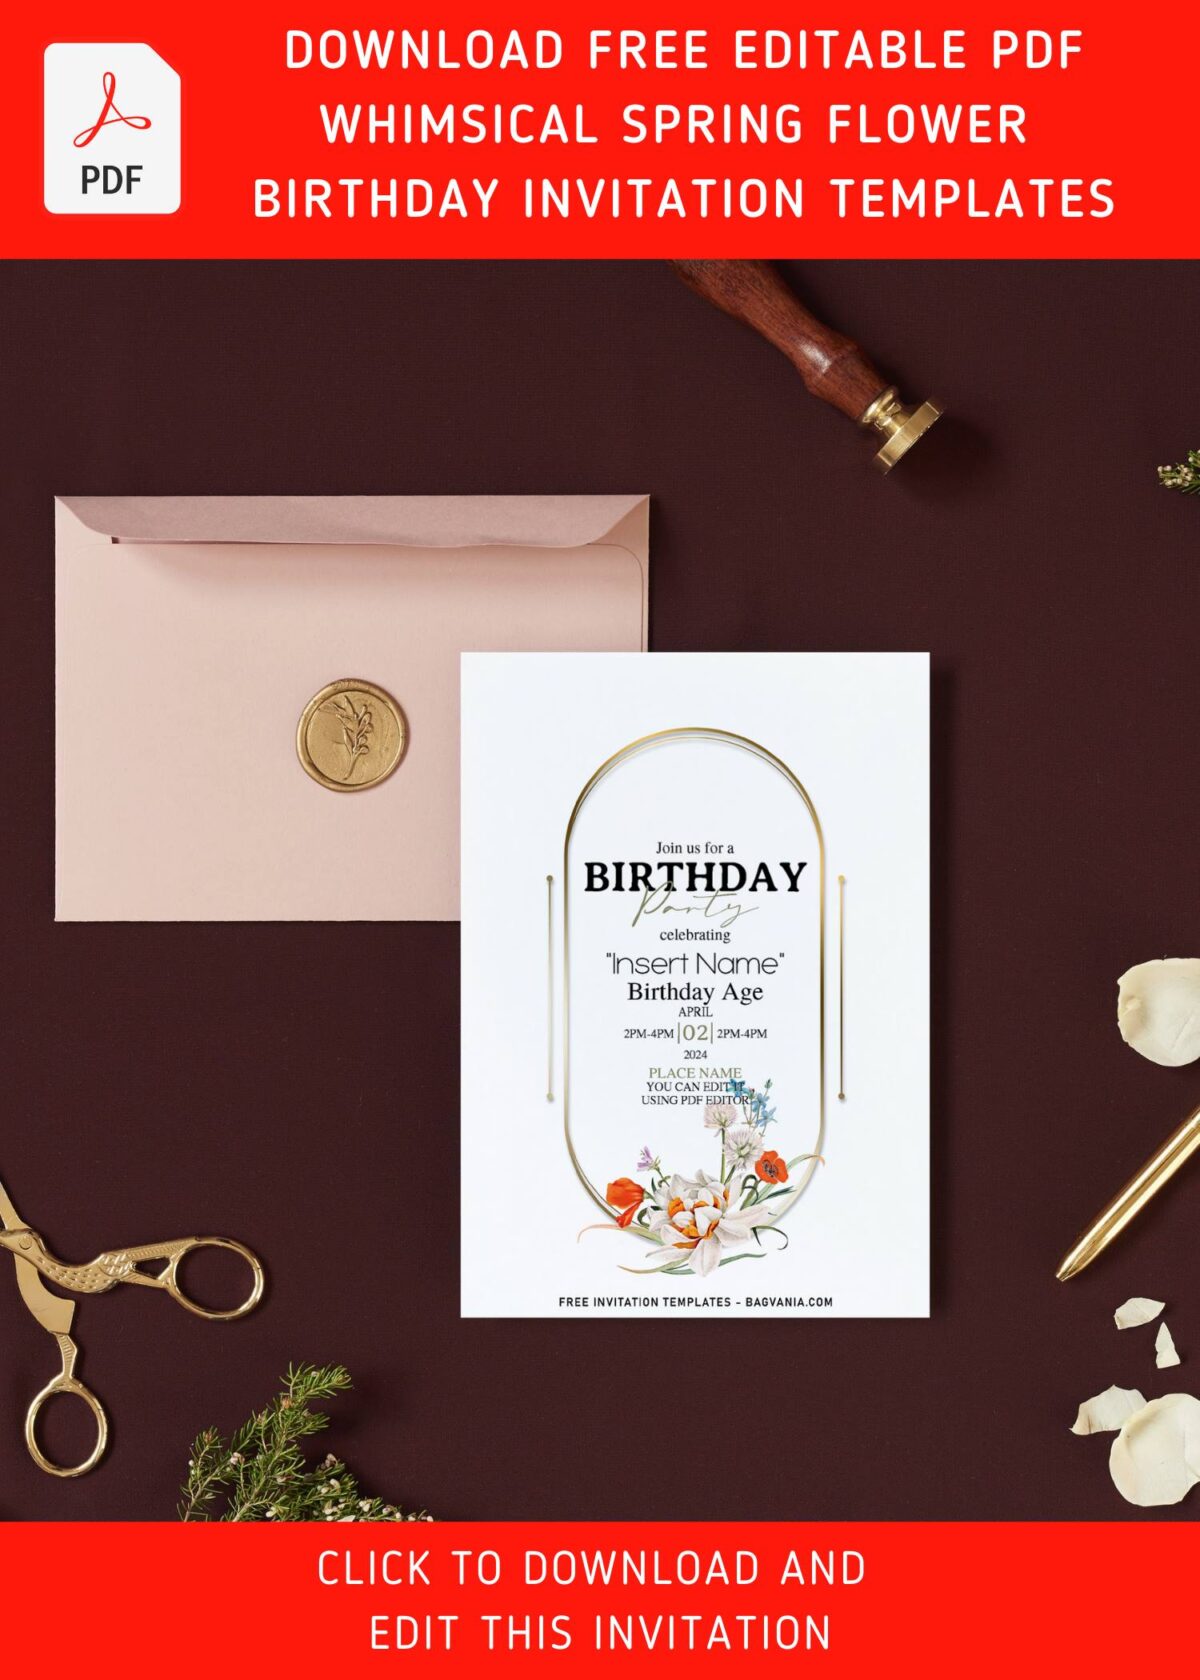 (Free Editable PDF) Whimsical Spring Birthday Invitation Templates with anemone and rose